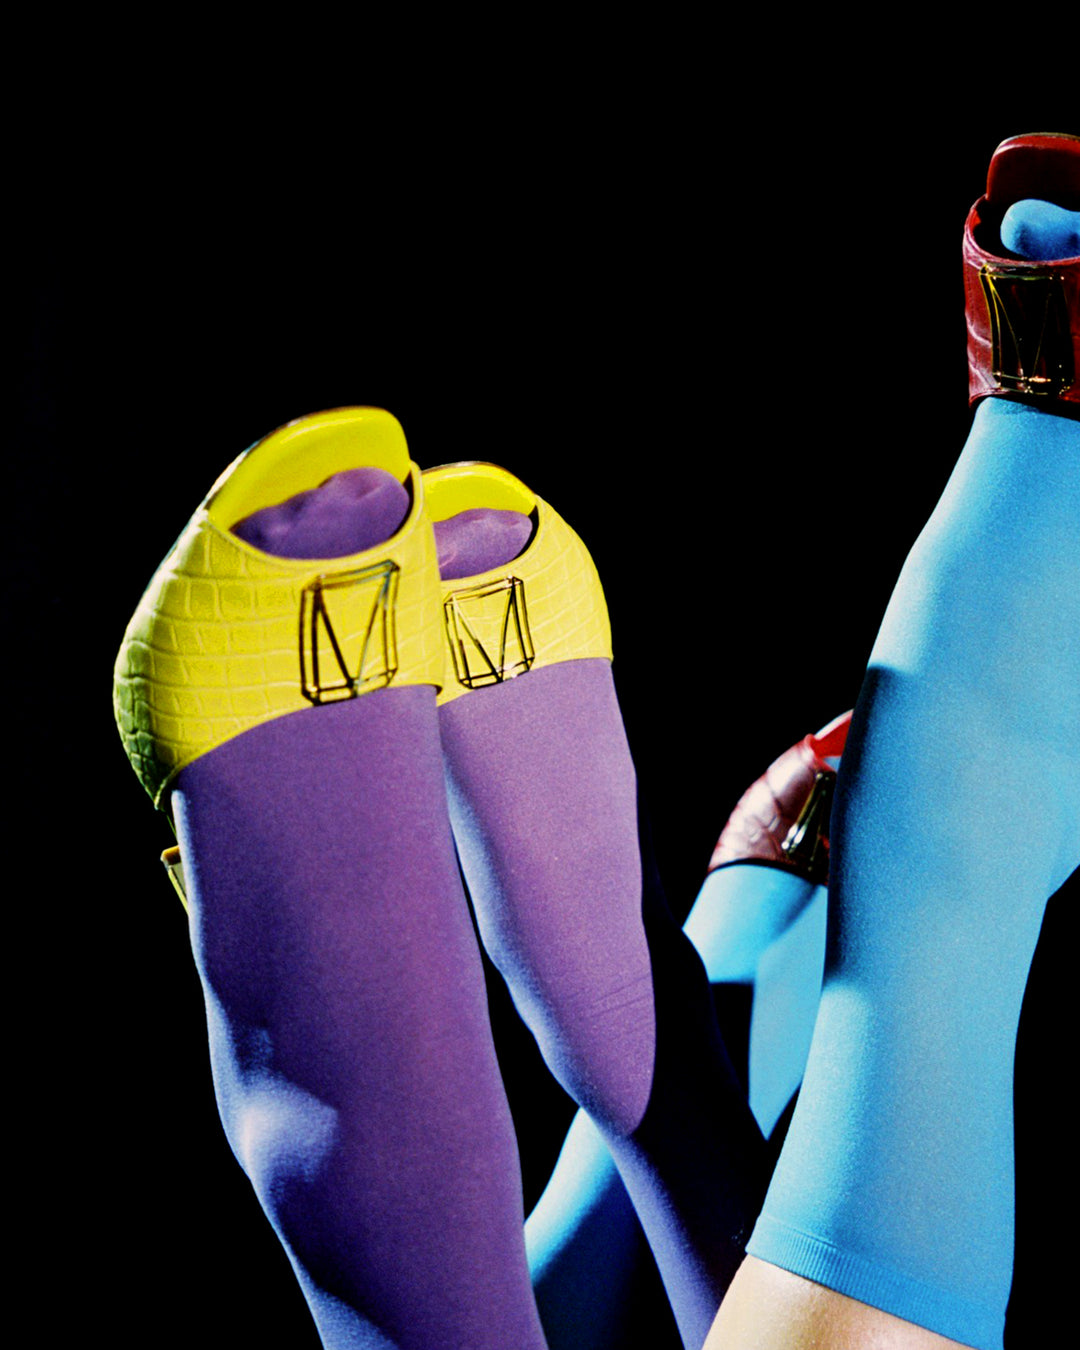 Colorful high-heeled shoes paired with vibrant socks against a black background